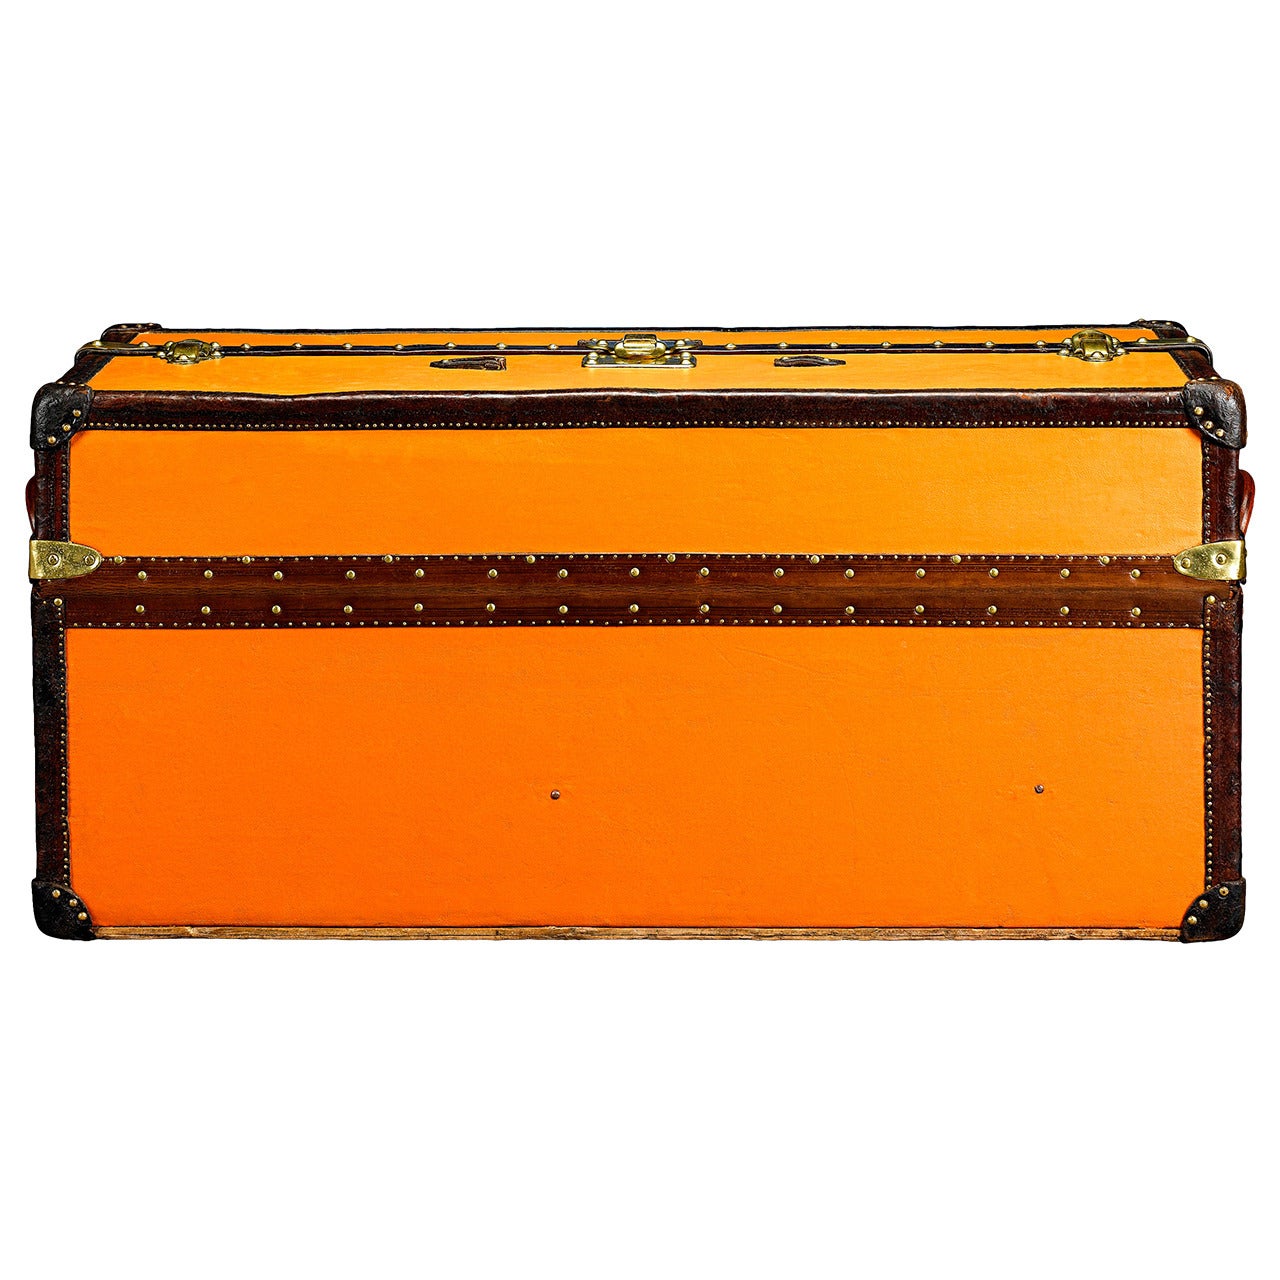 "Ideal" Travel Trunk by Louis Vuitton